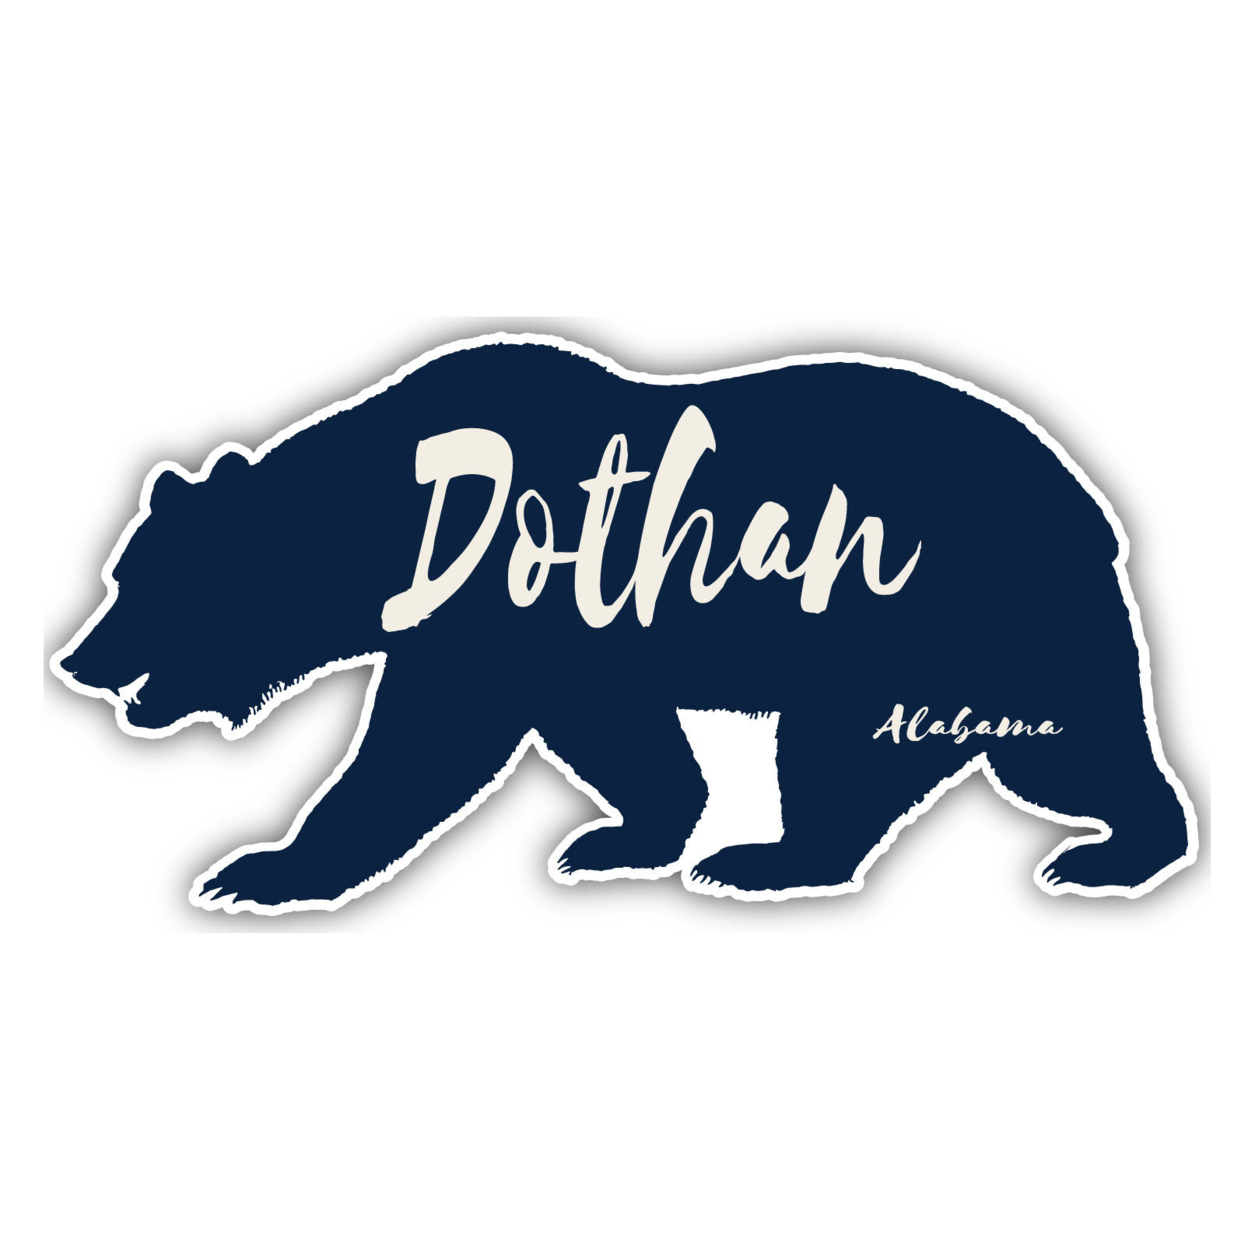 Dothan Alabama Souvenir Decorative Stickers (Choose Theme And Size) - 4-Pack, 2-Inch, Tent